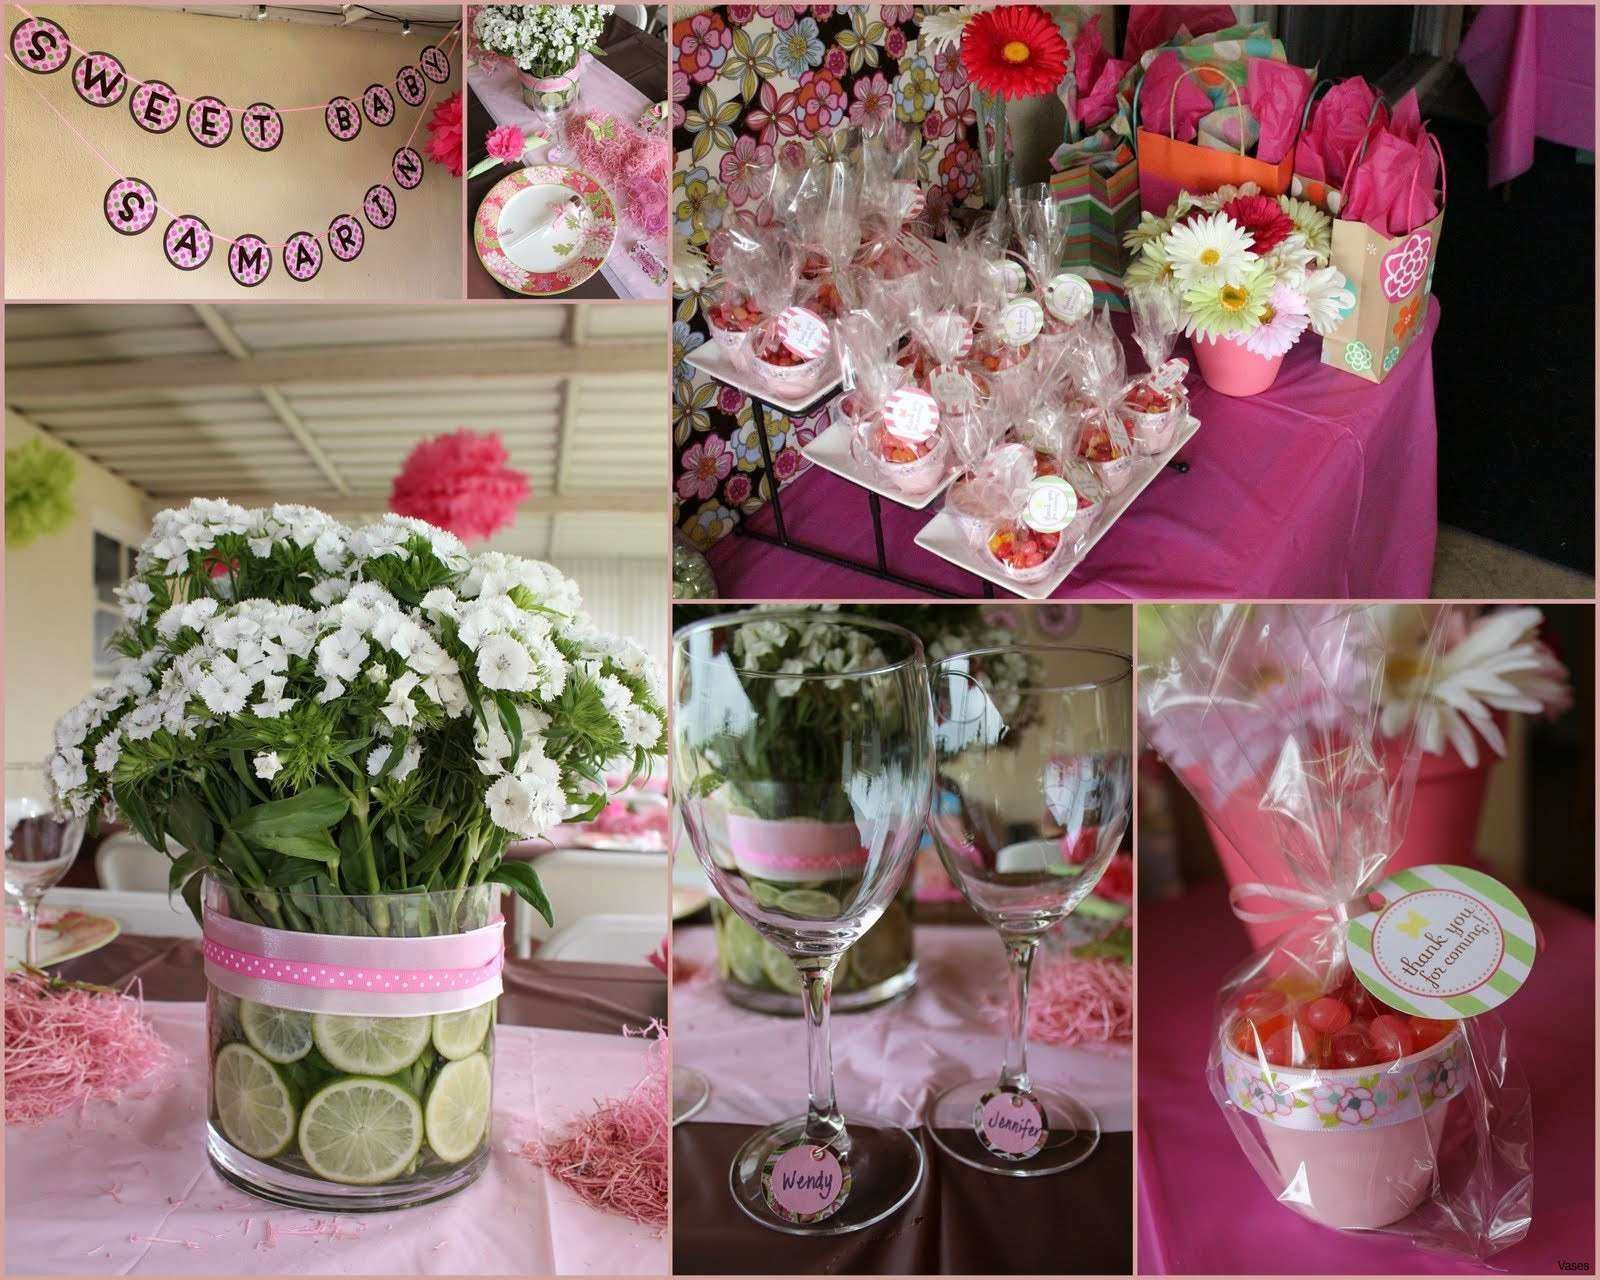 19 attractive Vases Table Centerpieces 2024 free download vases table centerpieces of rose garden design lovely vases baby shower flower tutu vase with rose garden design lovely vases baby shower flower tutu vase centerpiece for a i 0d design